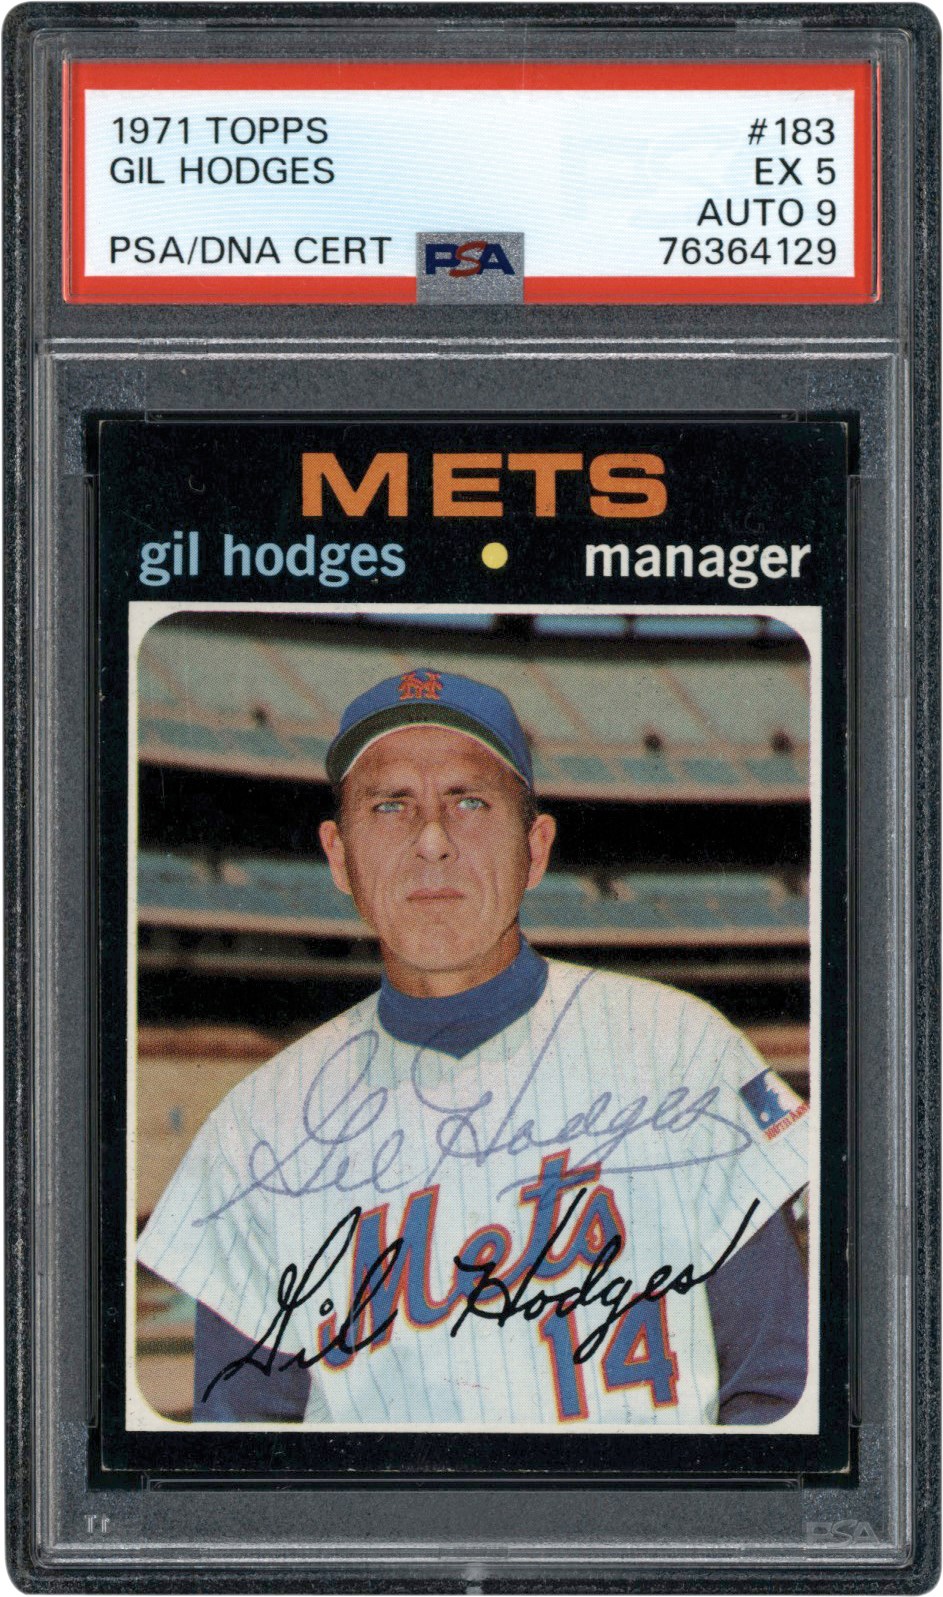 - Exceedingly Rare Signed 1971 Topps #183 Gil Hodges PSA EX 5 Auto 9 (One of Three Known)